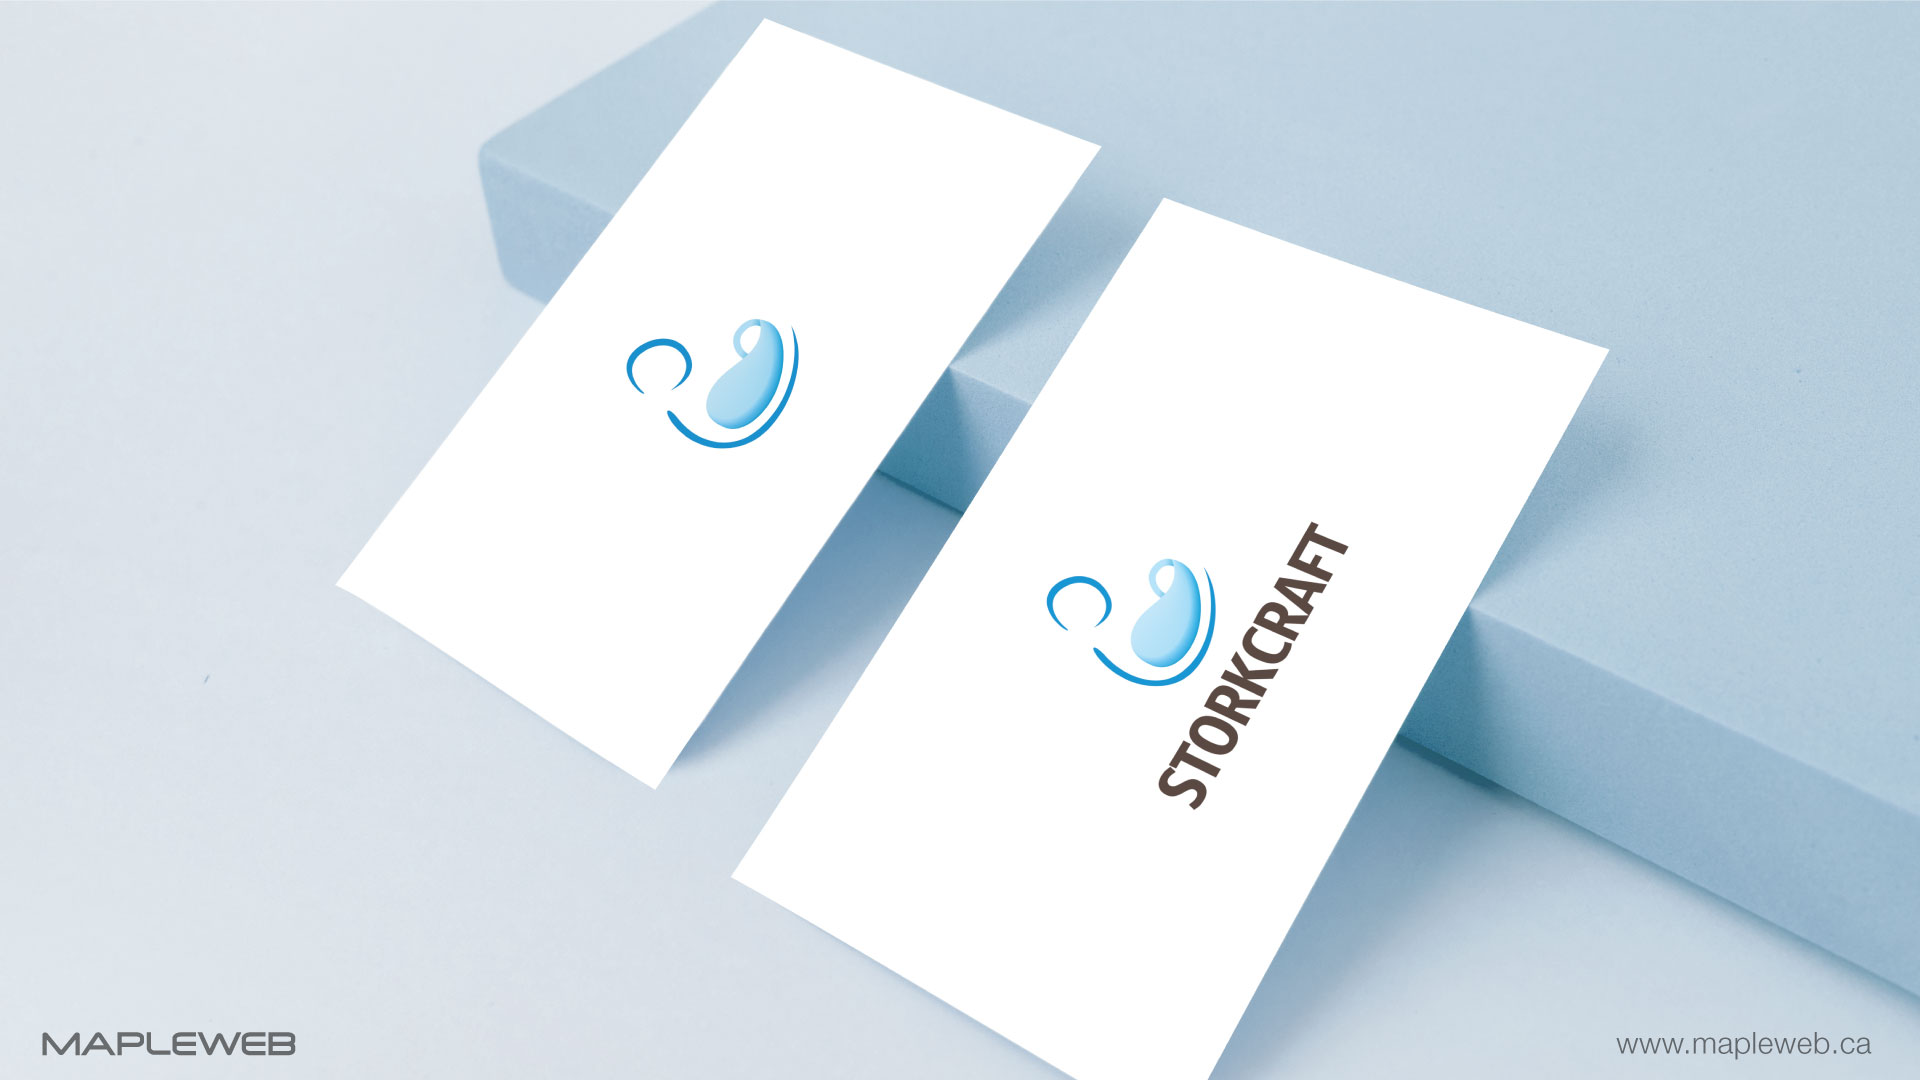 storkcraft-brand-logo-design-by-mapleweb-vancouver-canada-white-business-card-mock